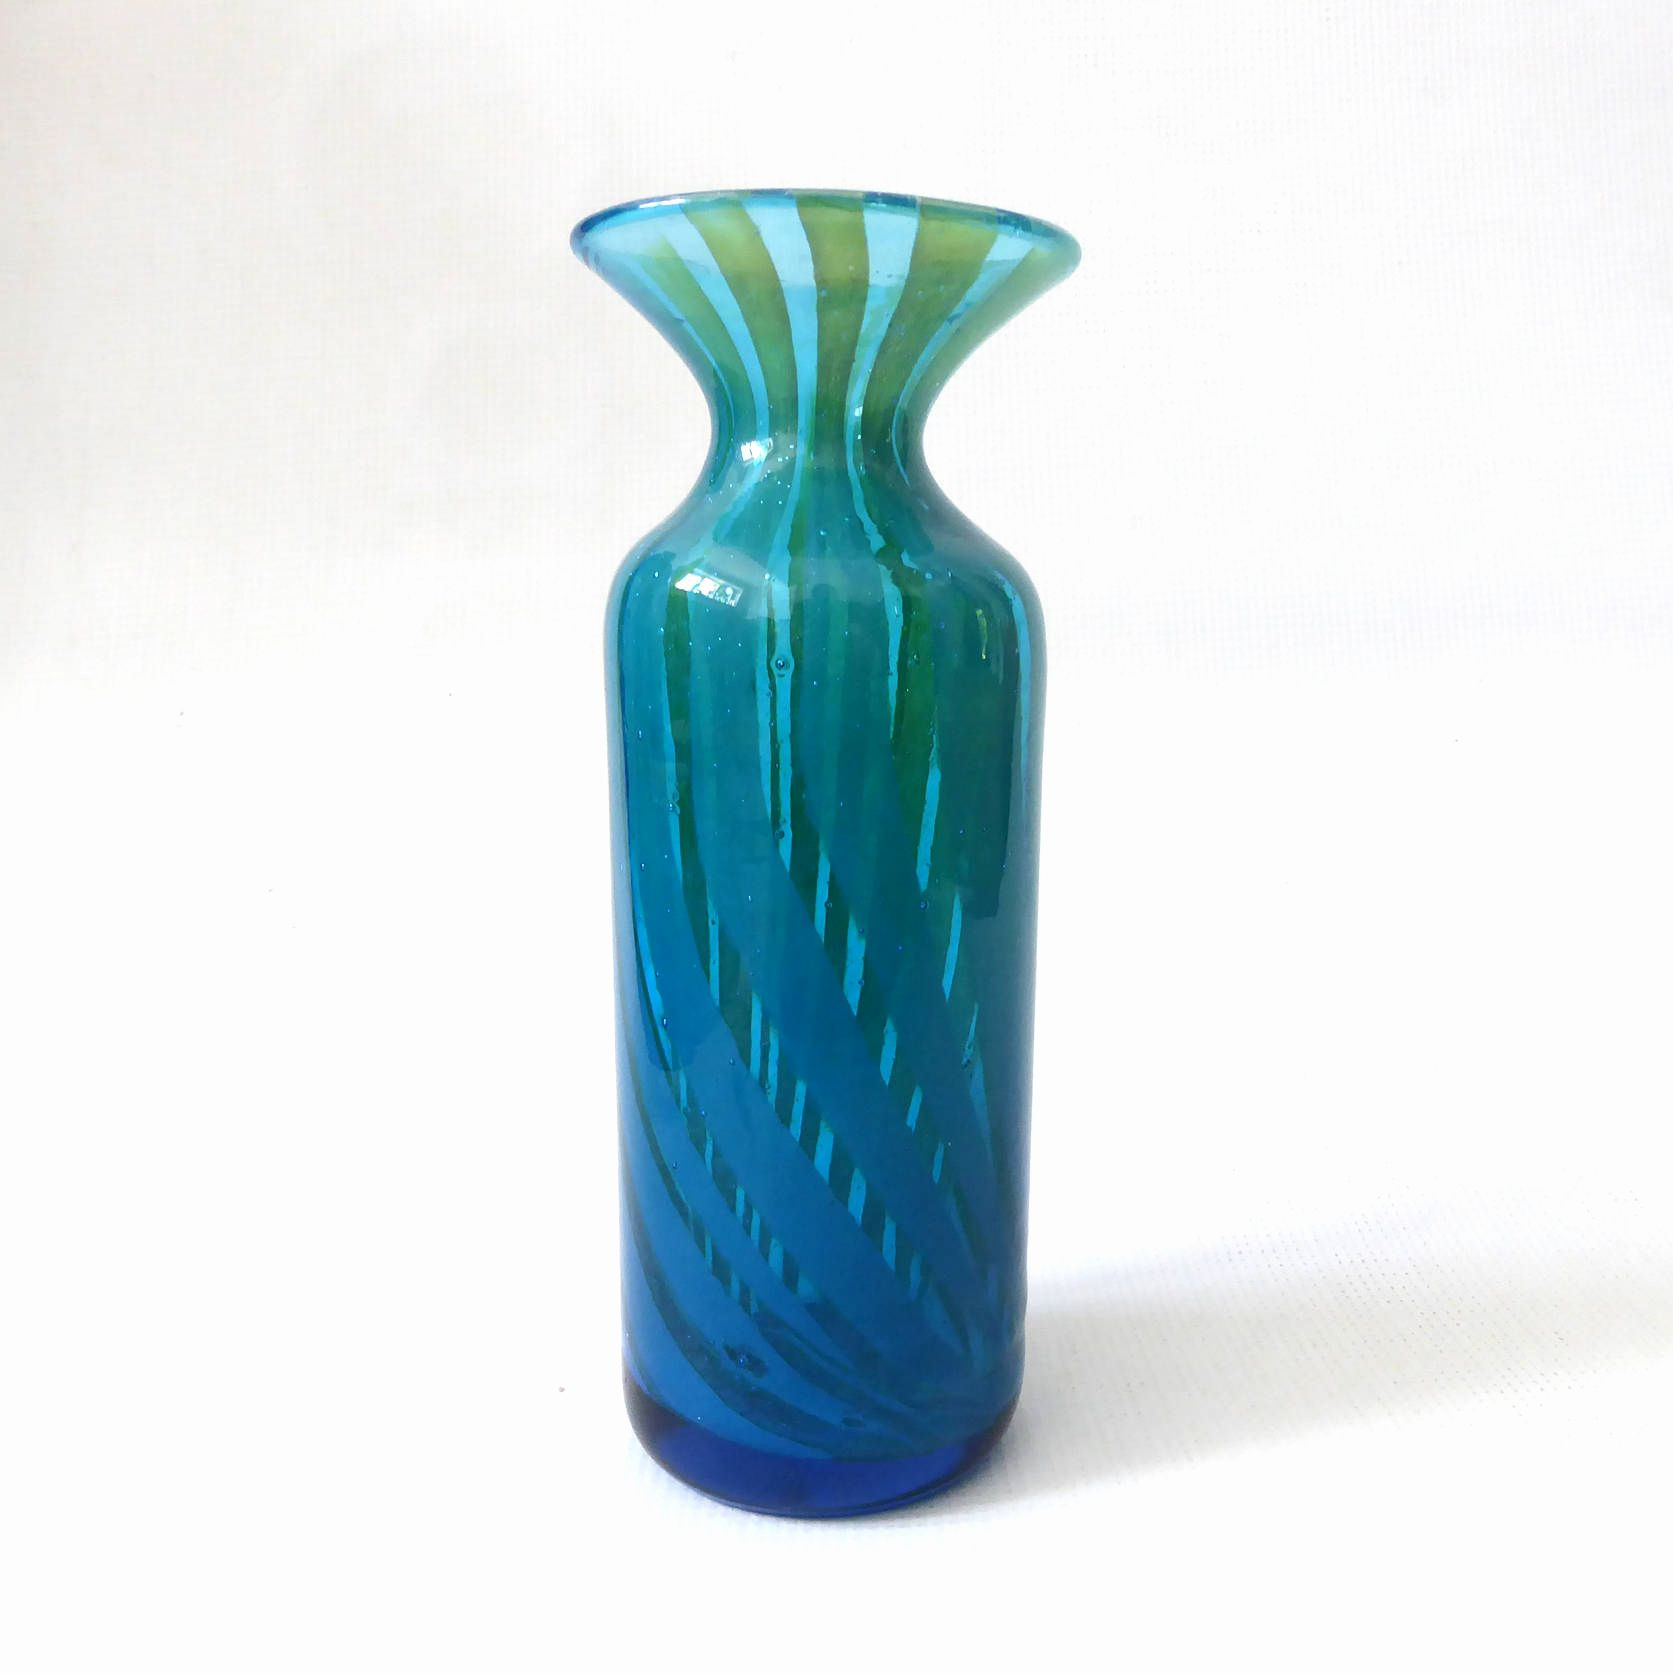 30 Lovable Amber Bubble Glass Vase 2023 free download amber bubble glass vase of 35 antique green glass vases the weekly world throughout antique glass vases identify vase and cellar image avorcor